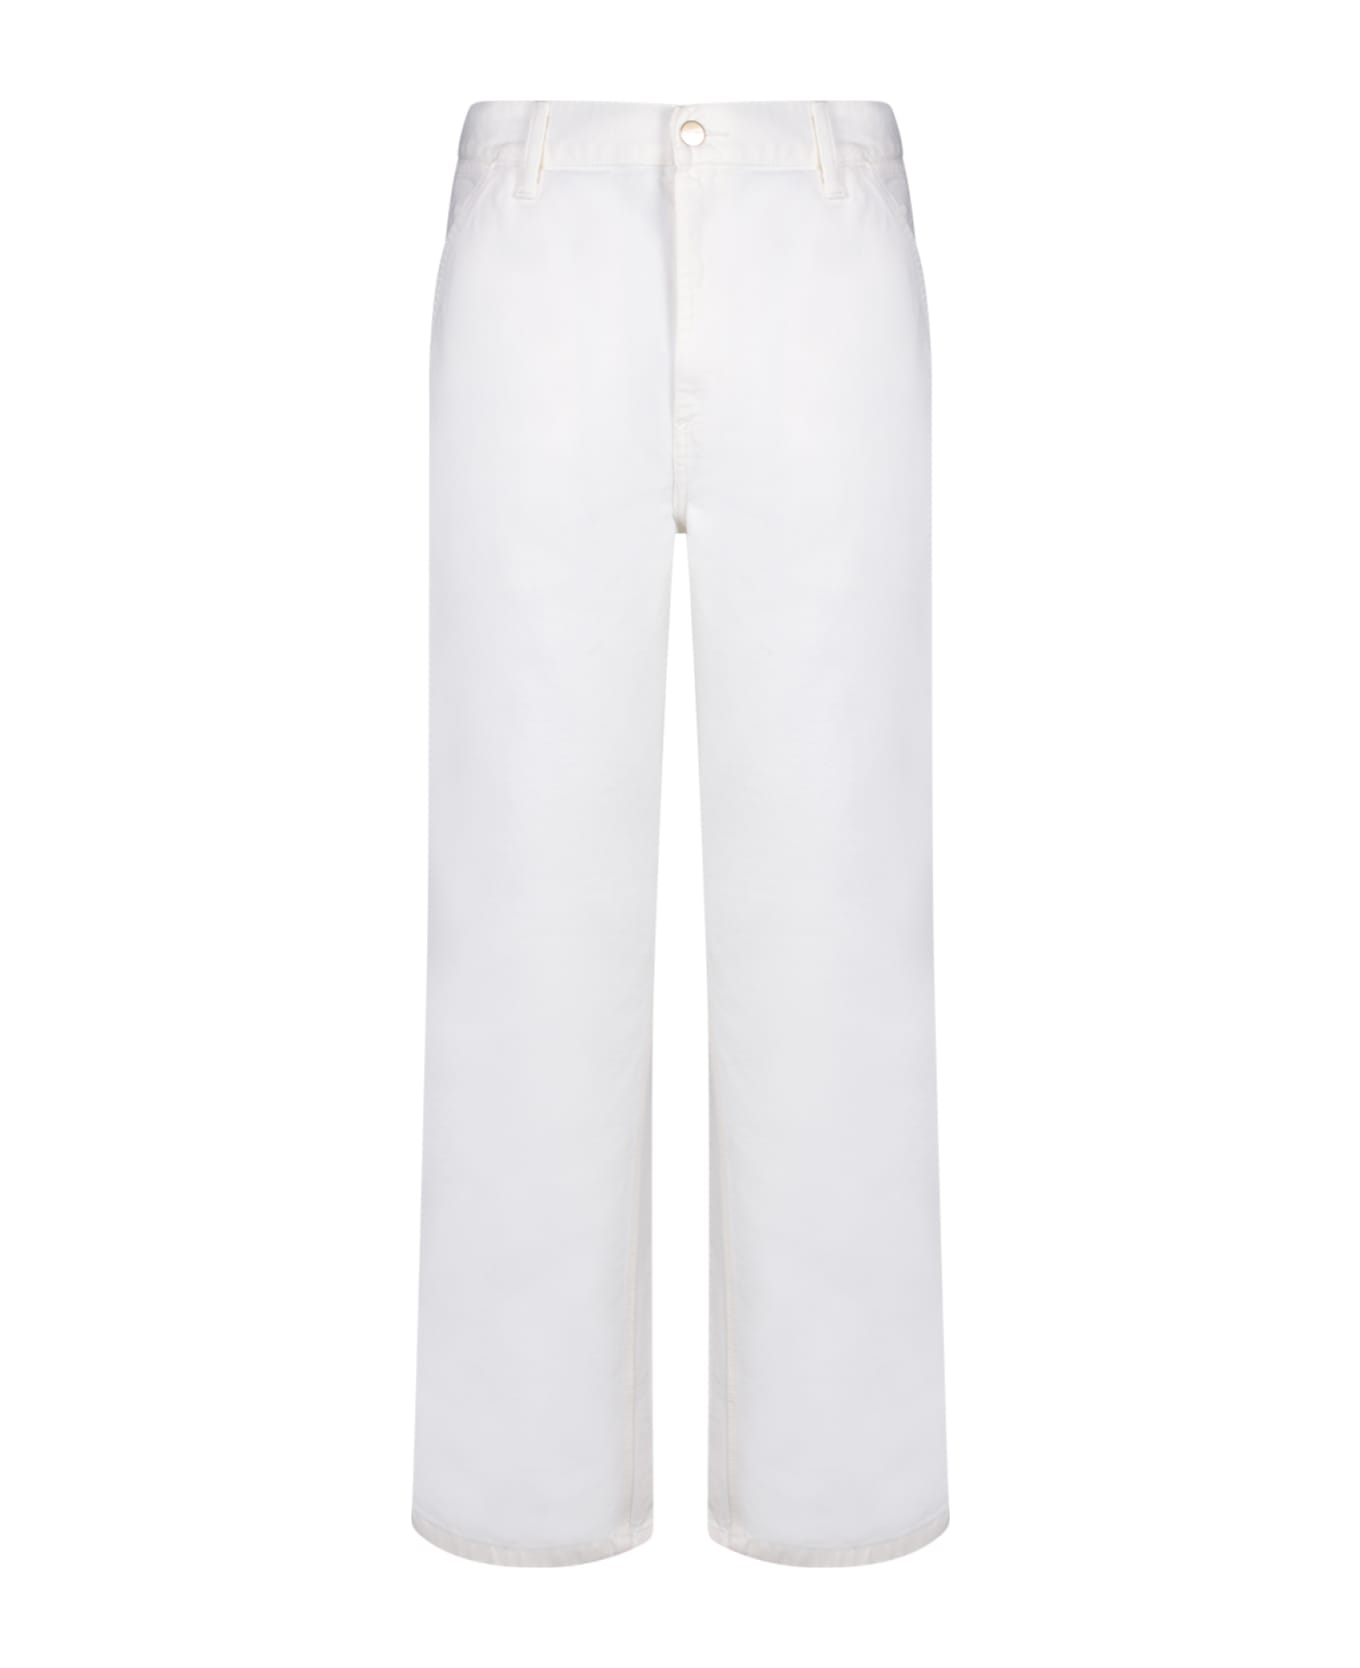 Carhartt 'simple Pant' Straight Fit Jeans - White